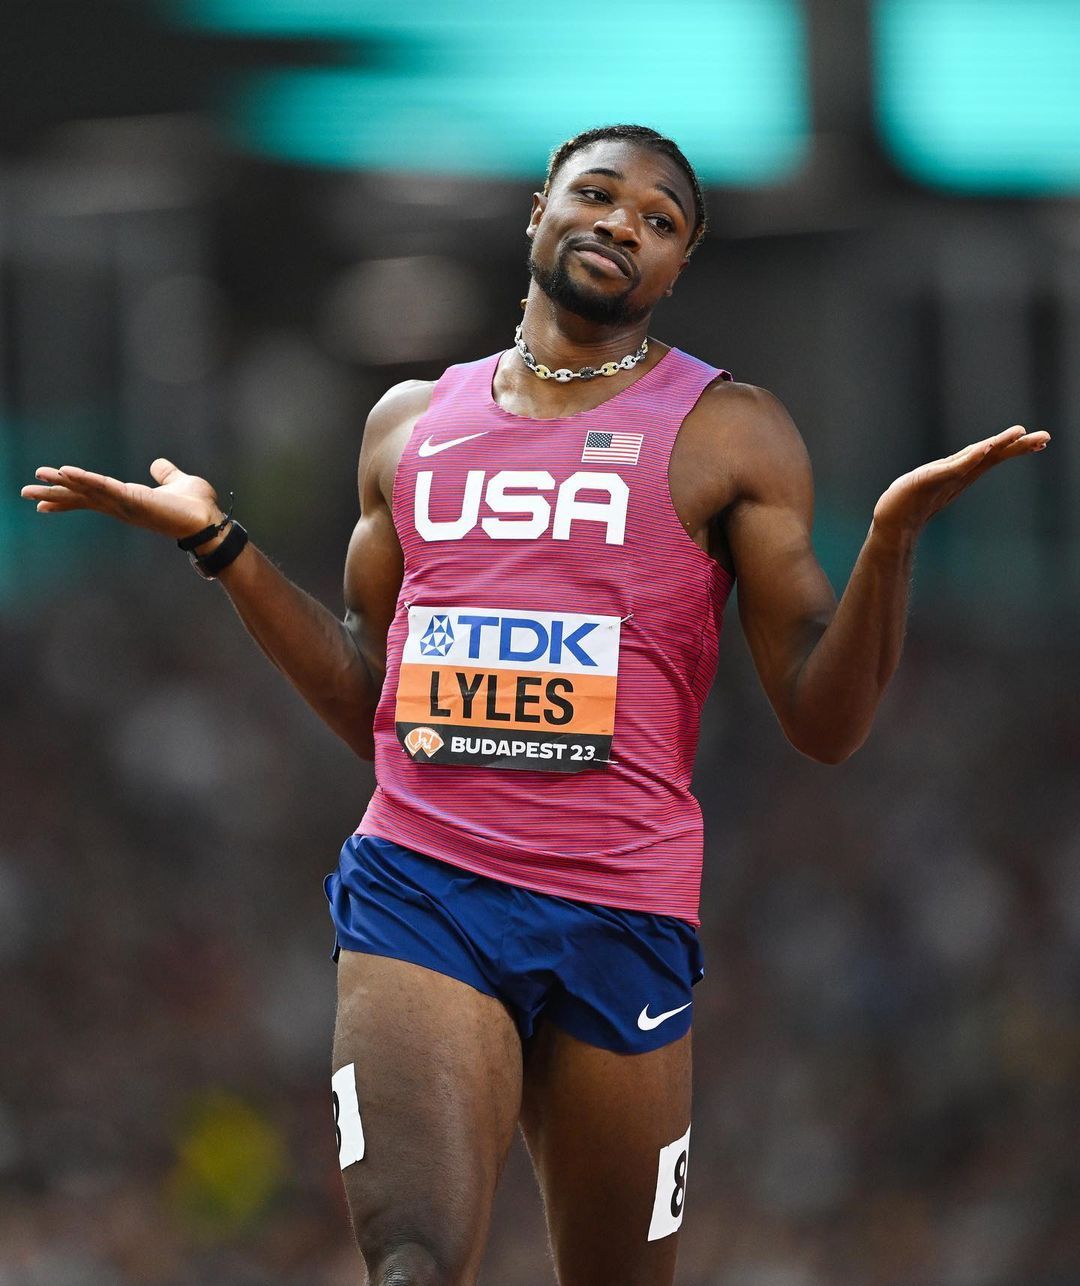 Ready for Zurich Diamond League --- Noah Lyles in the men's semi-finals at the Budapest 23 World Athletics Championships